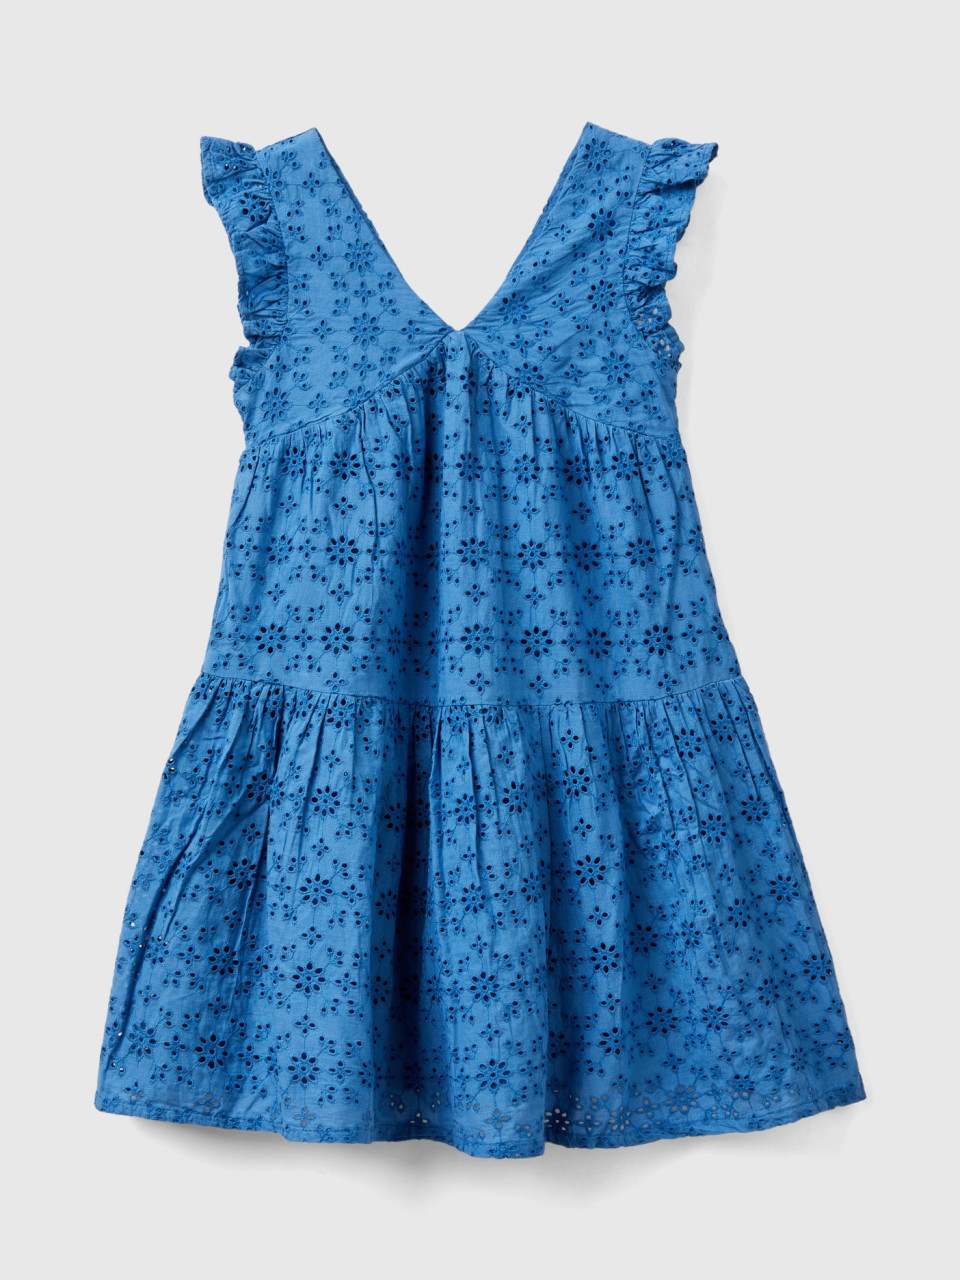 Benetton, Dress With Broderie Anglaise Embroidery, Blue, Kids